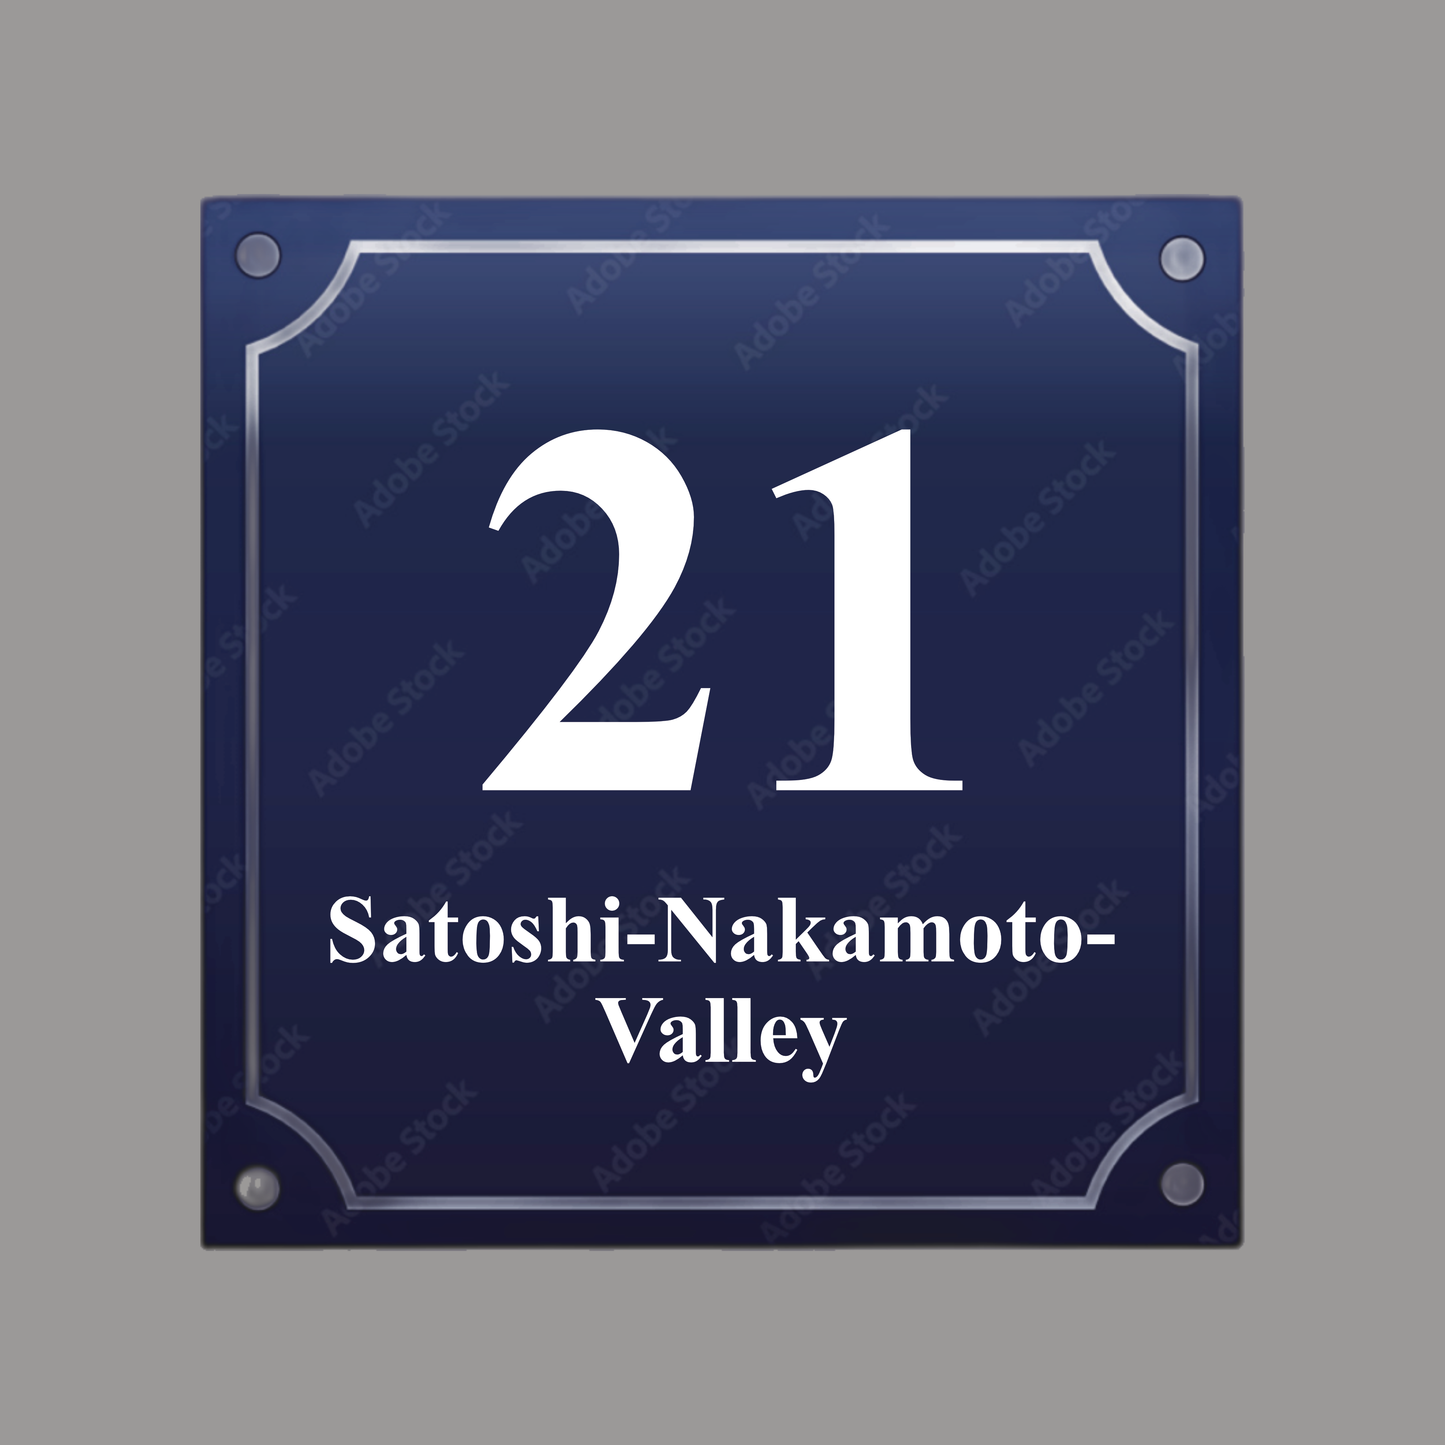 HOUSE NUMBER "Valley 21"